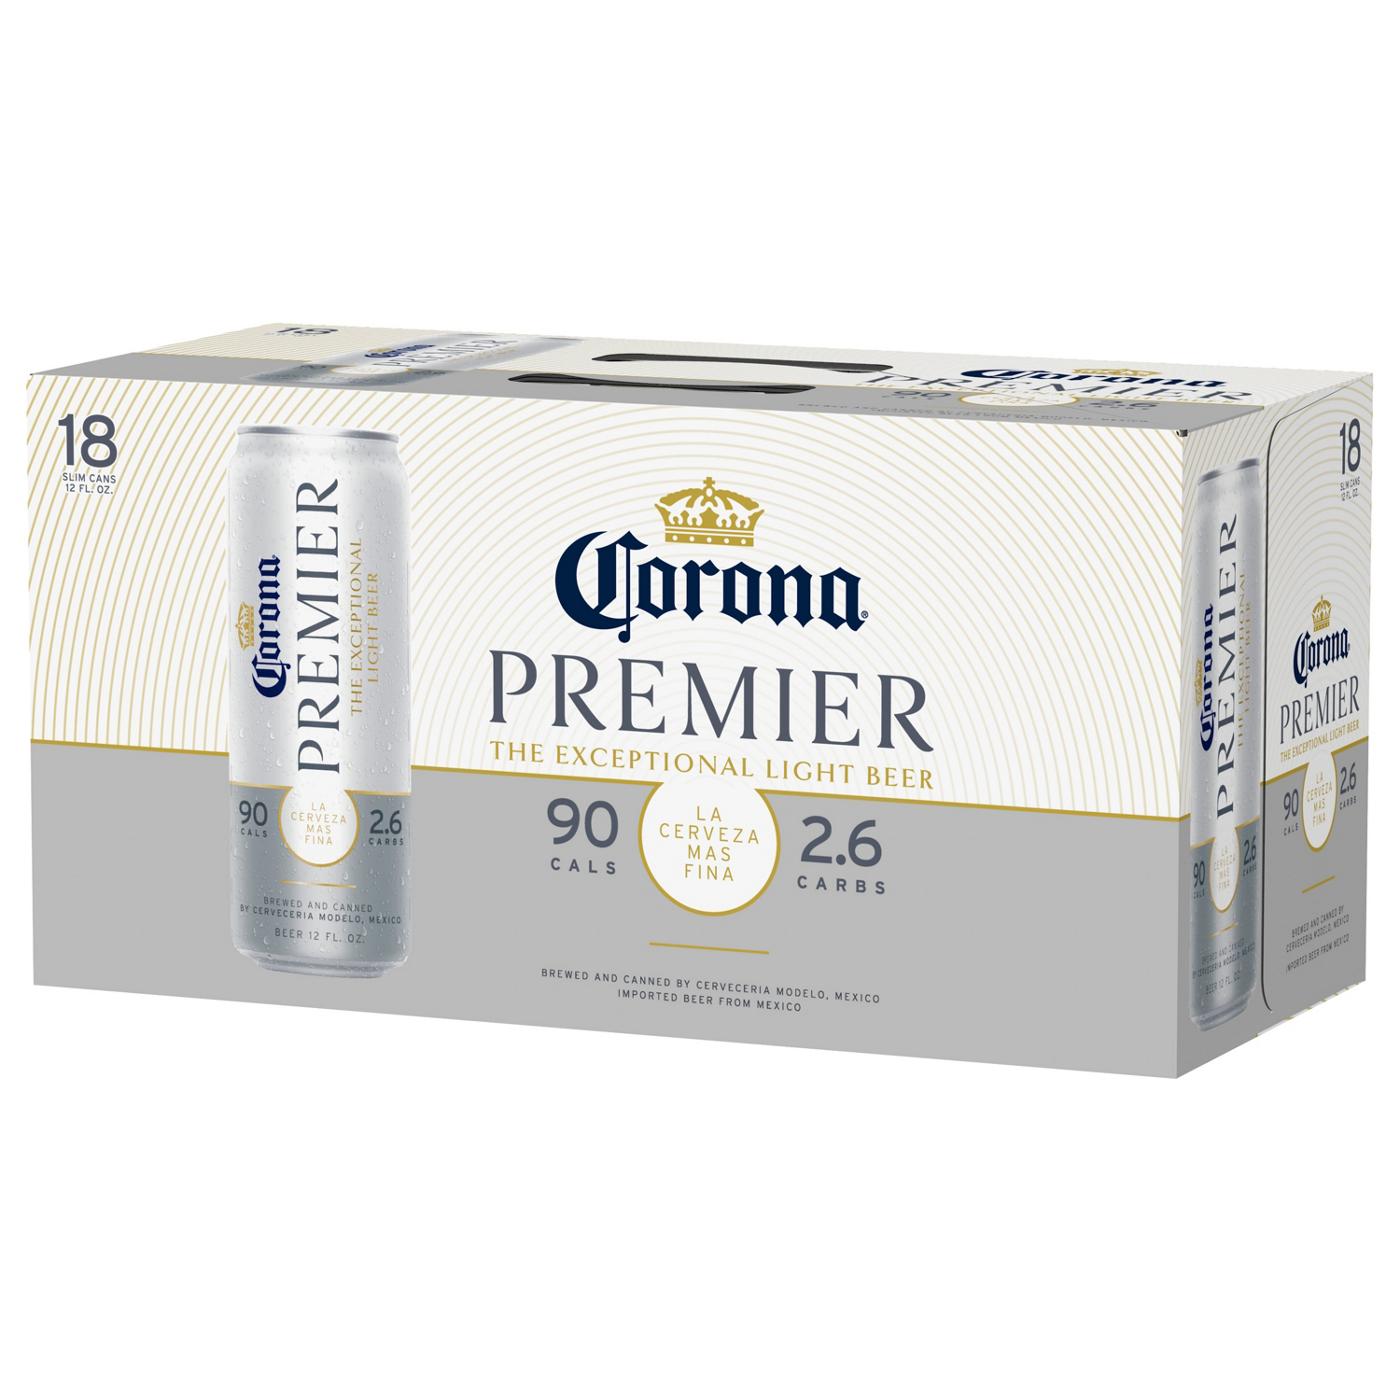 Corona Premier Mexican Lager Import Light Beer 12 oz Cans, 18 pk; image 6 of 9